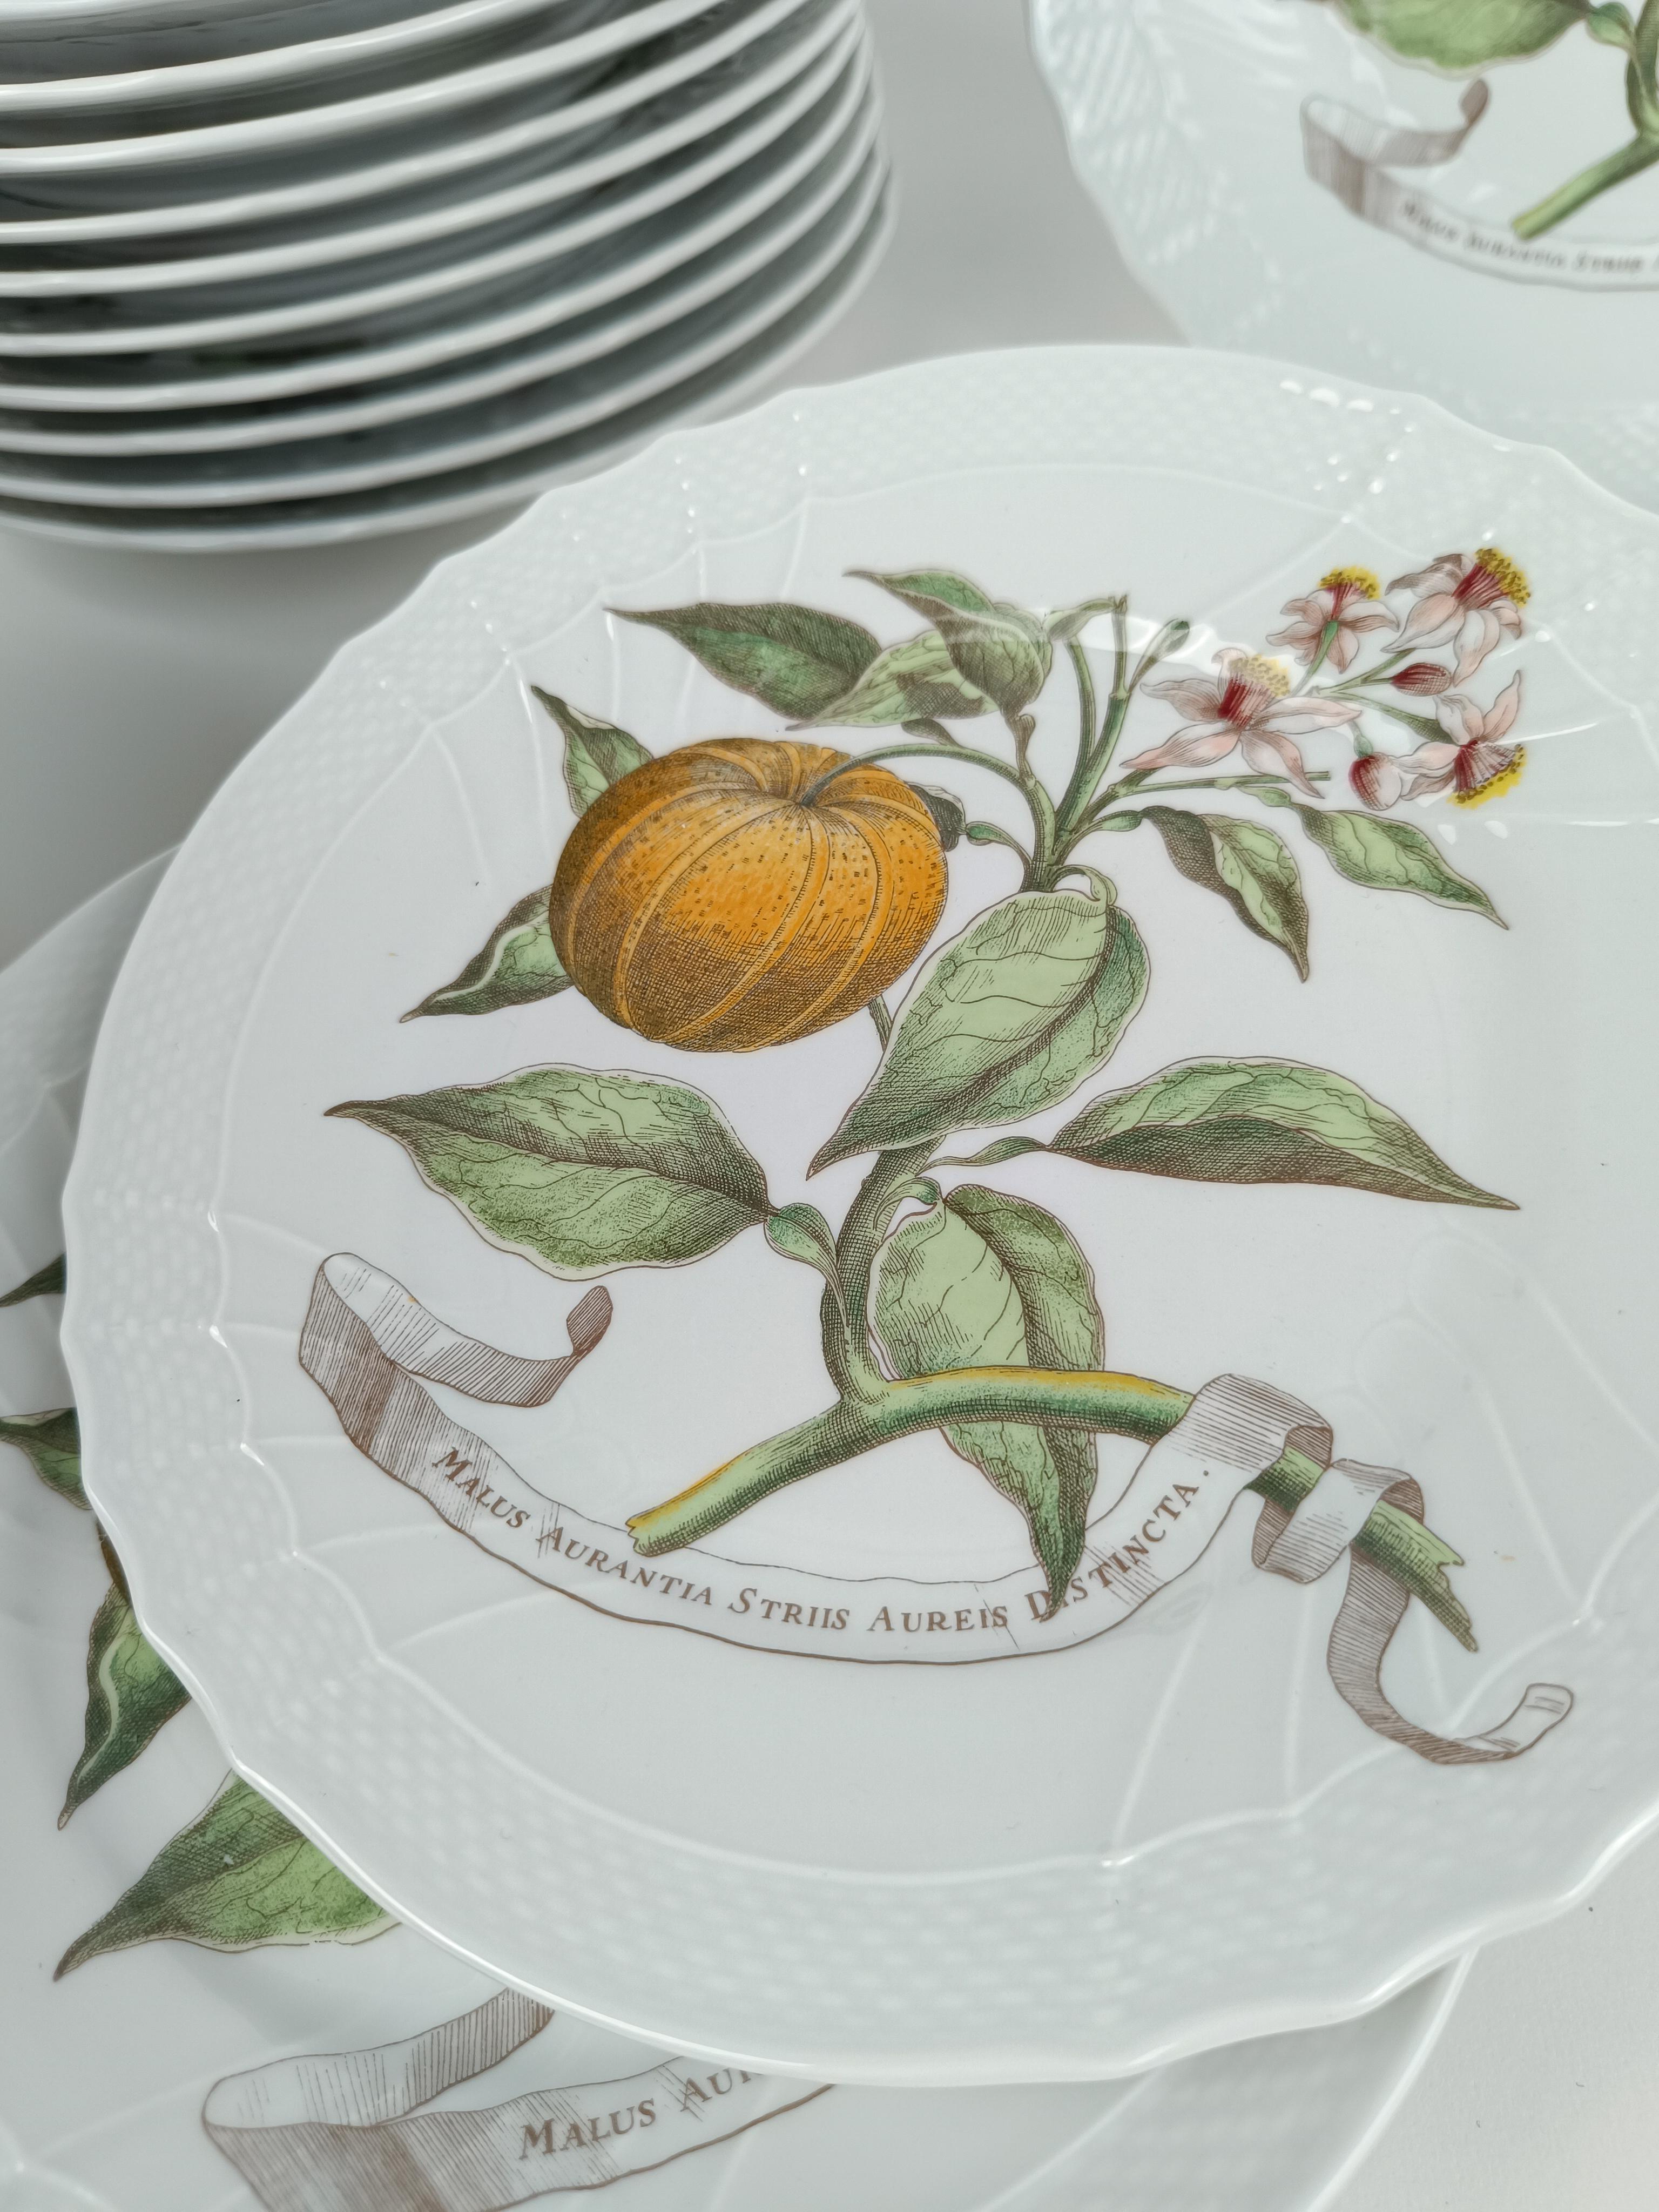 A set of dishes made in Italy during the 80s, as attested by the date printed on the back of the plate, but inspired by 18th century porcelain, to be precise inspired by the 